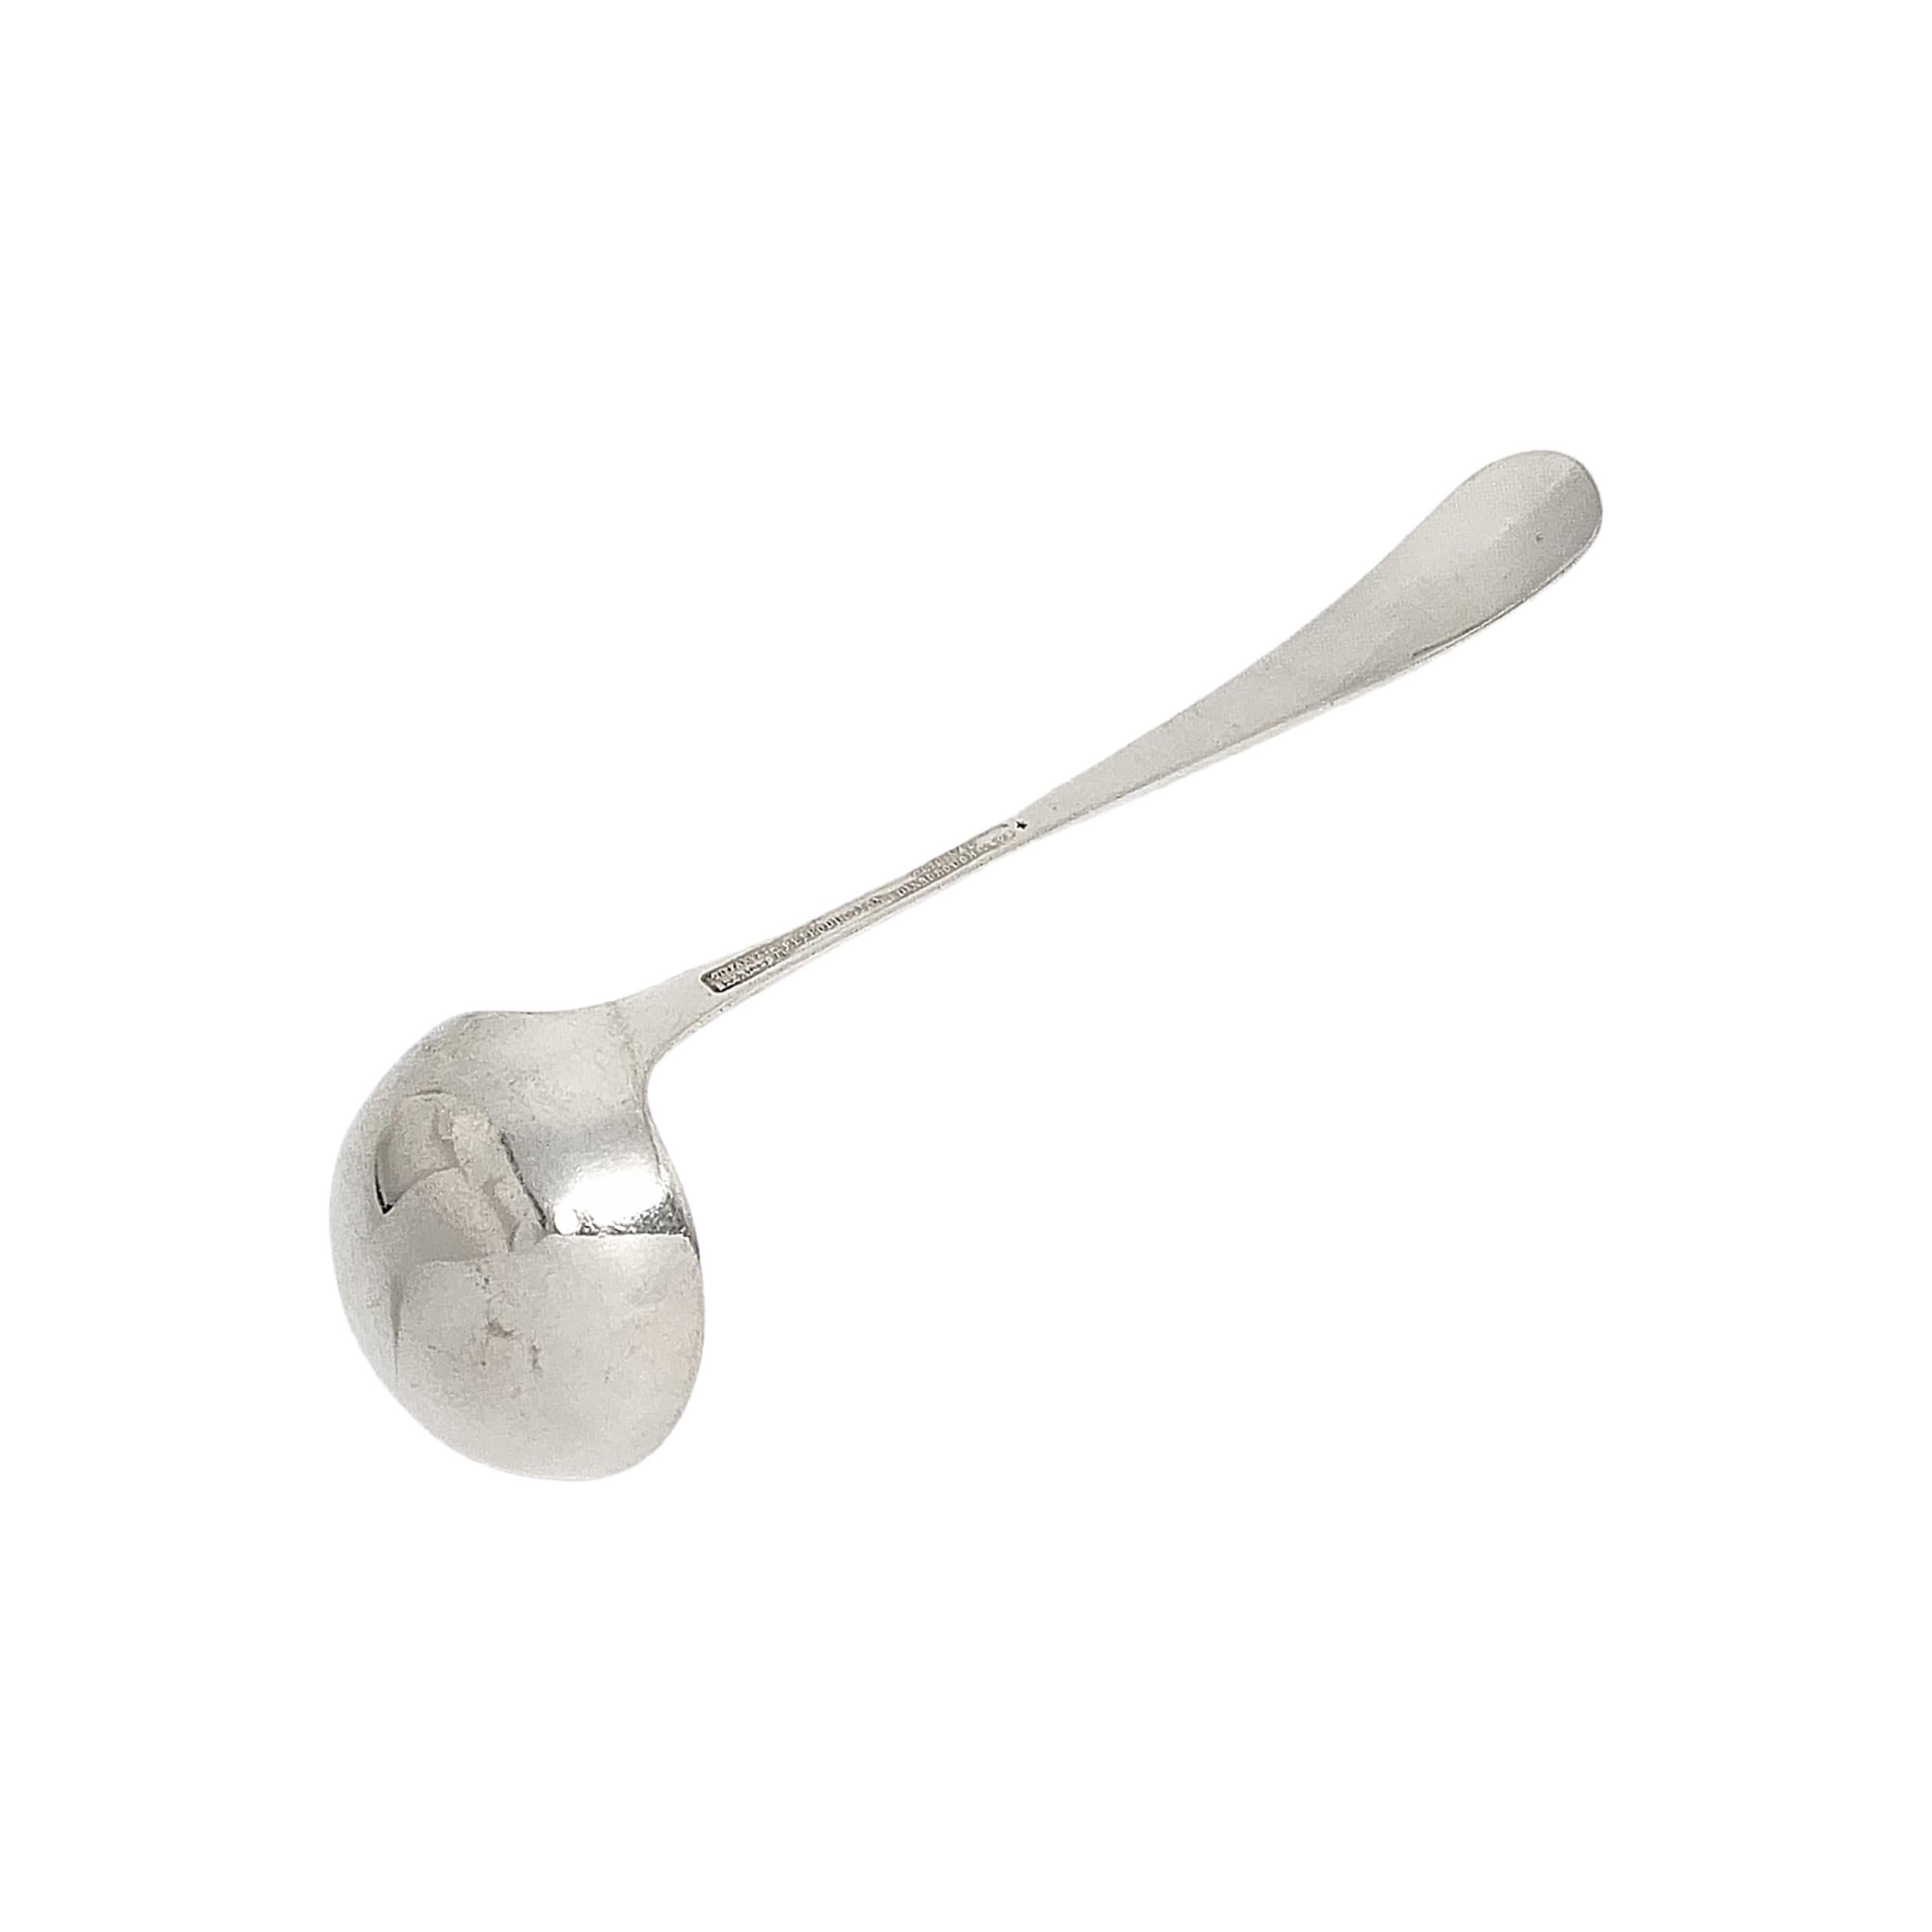 Tiffany & Co Sterling Silver Reproduction Edinborough Ladle with Monogram 'C' For Sale 4